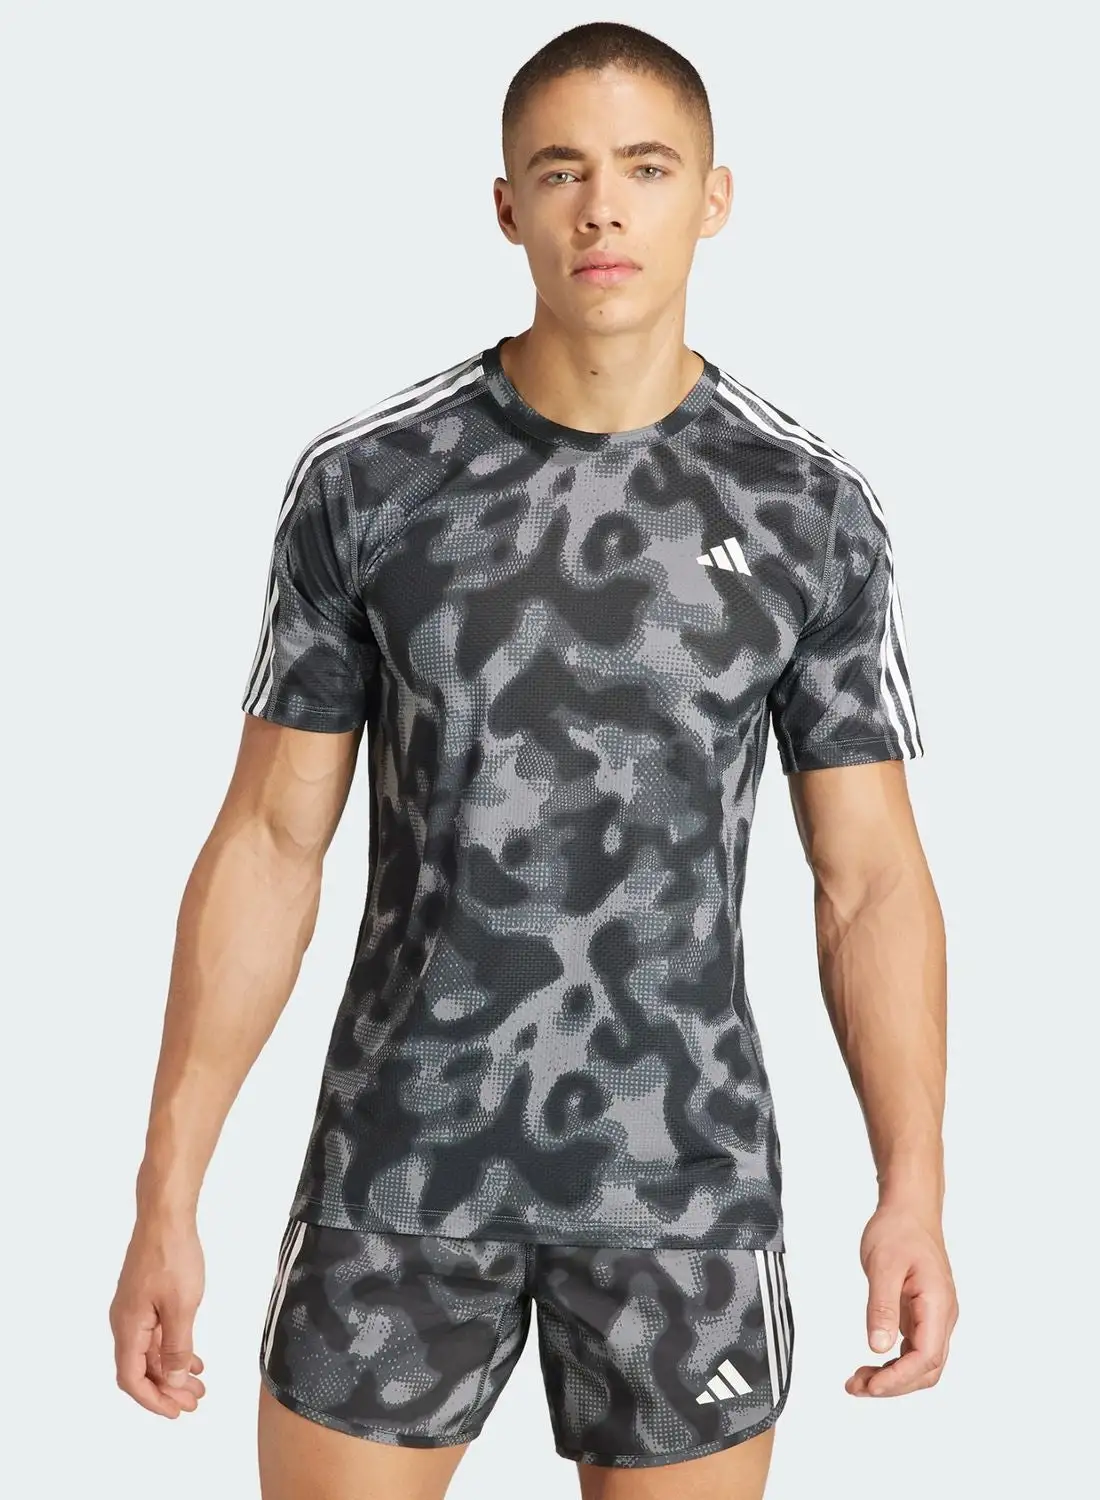 Adidas 3 Stripes Own The Run All Over Printed T-Shirt